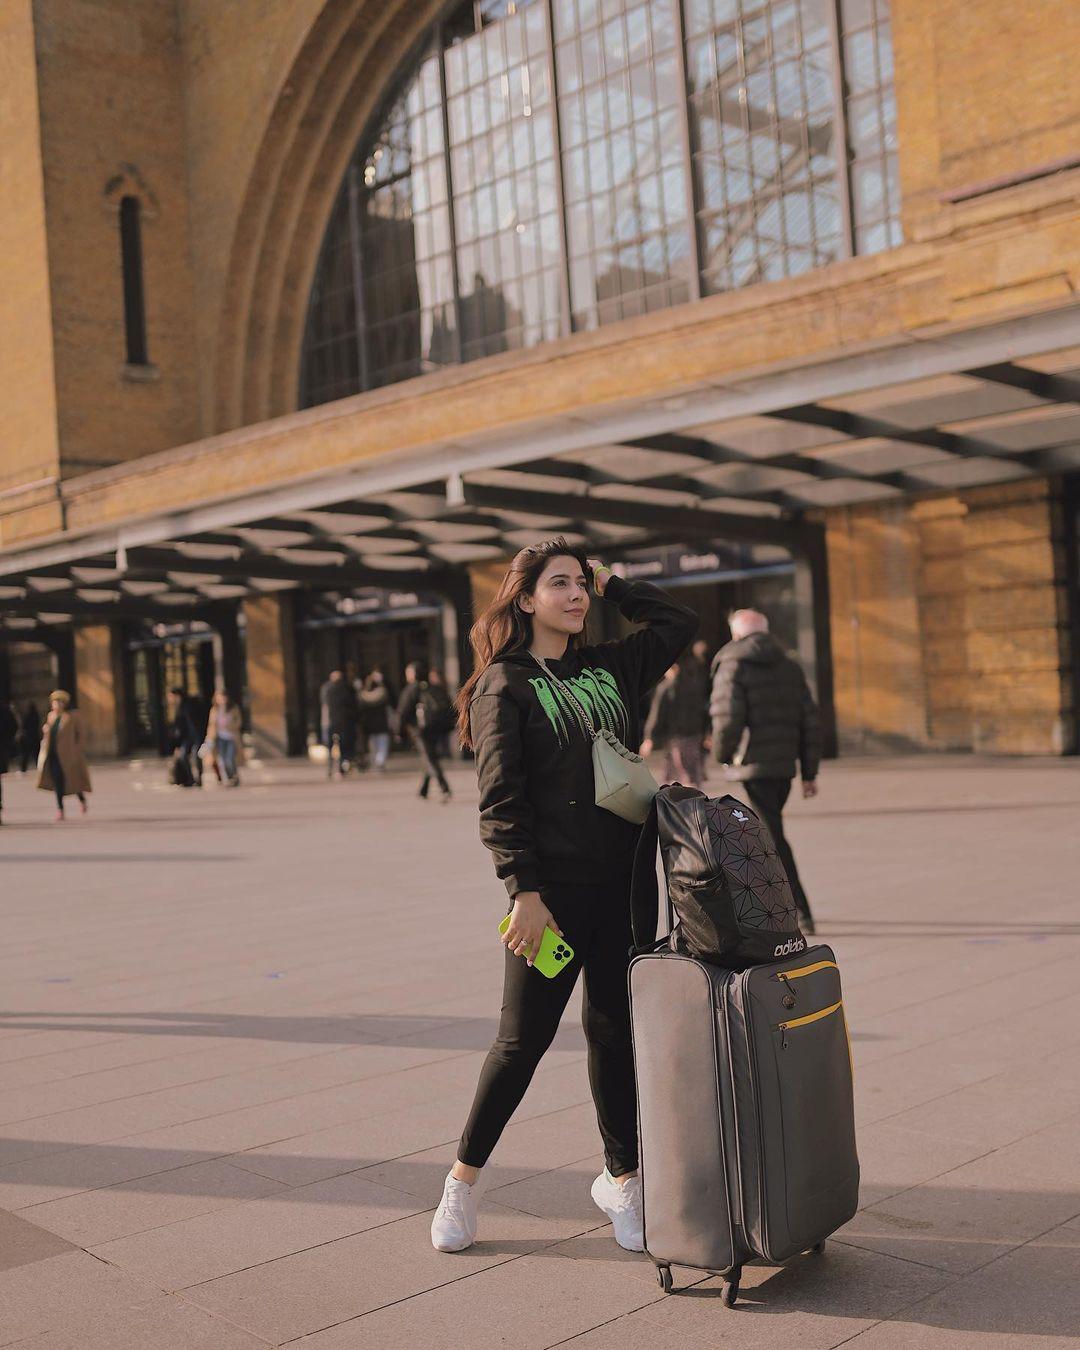 See you in a bit London! ✨ We have so many trains to catch today, just got this one 1 minute before it left the platform. Bollywood moment nai hua, khudi bag uper charanay paray aur Khud ko bhi :))))